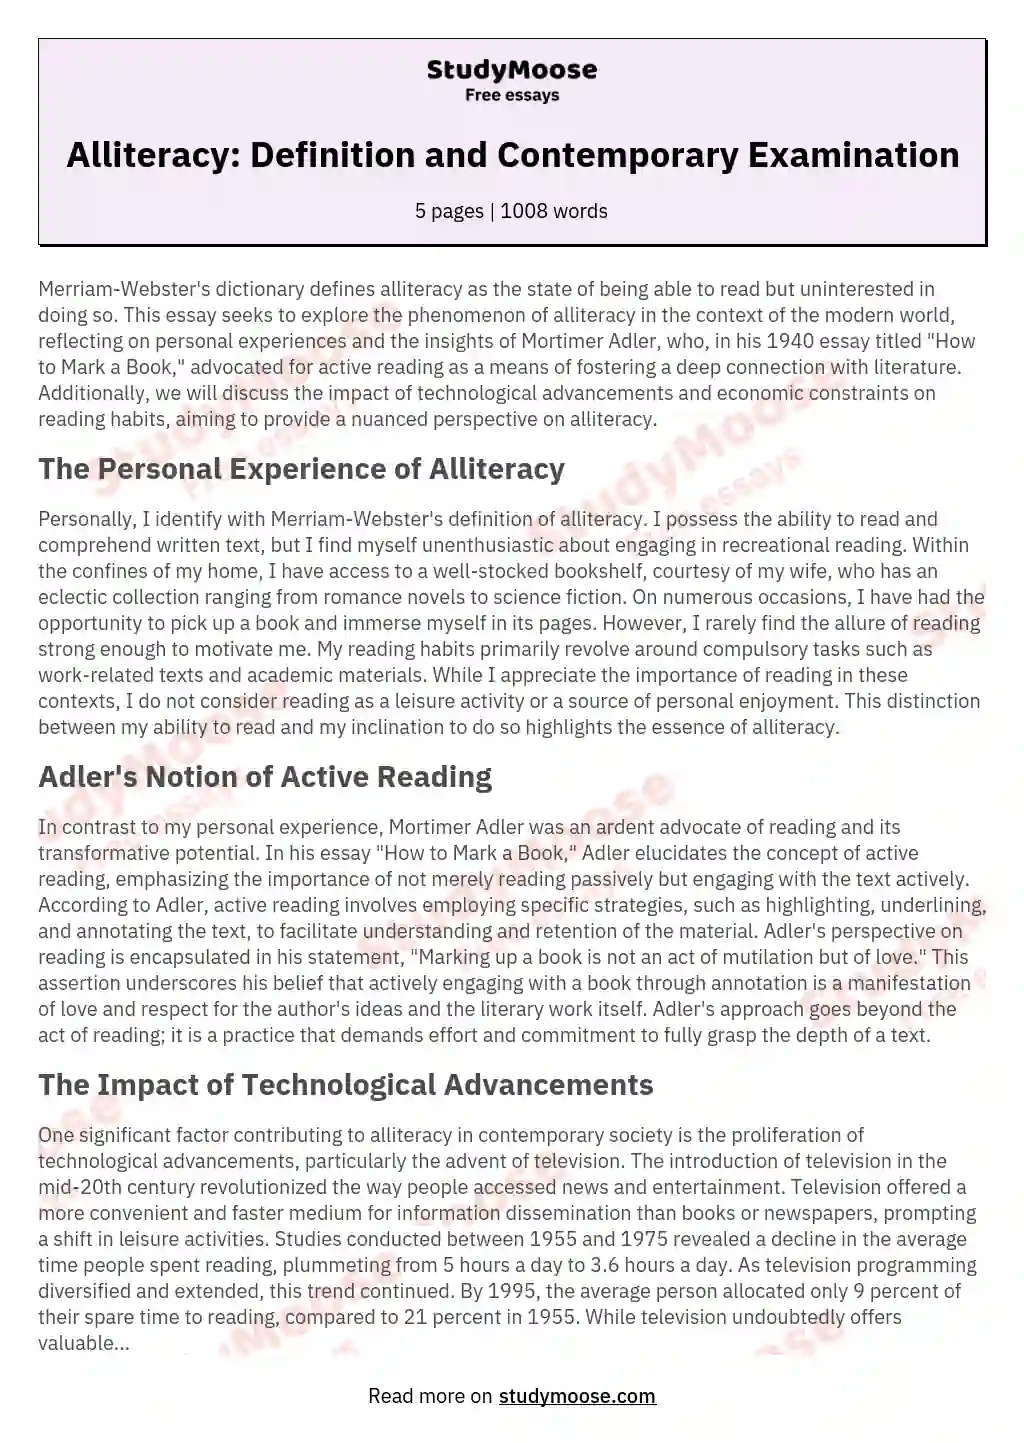 Alliteracy: Definition and Contemporary Examination essay